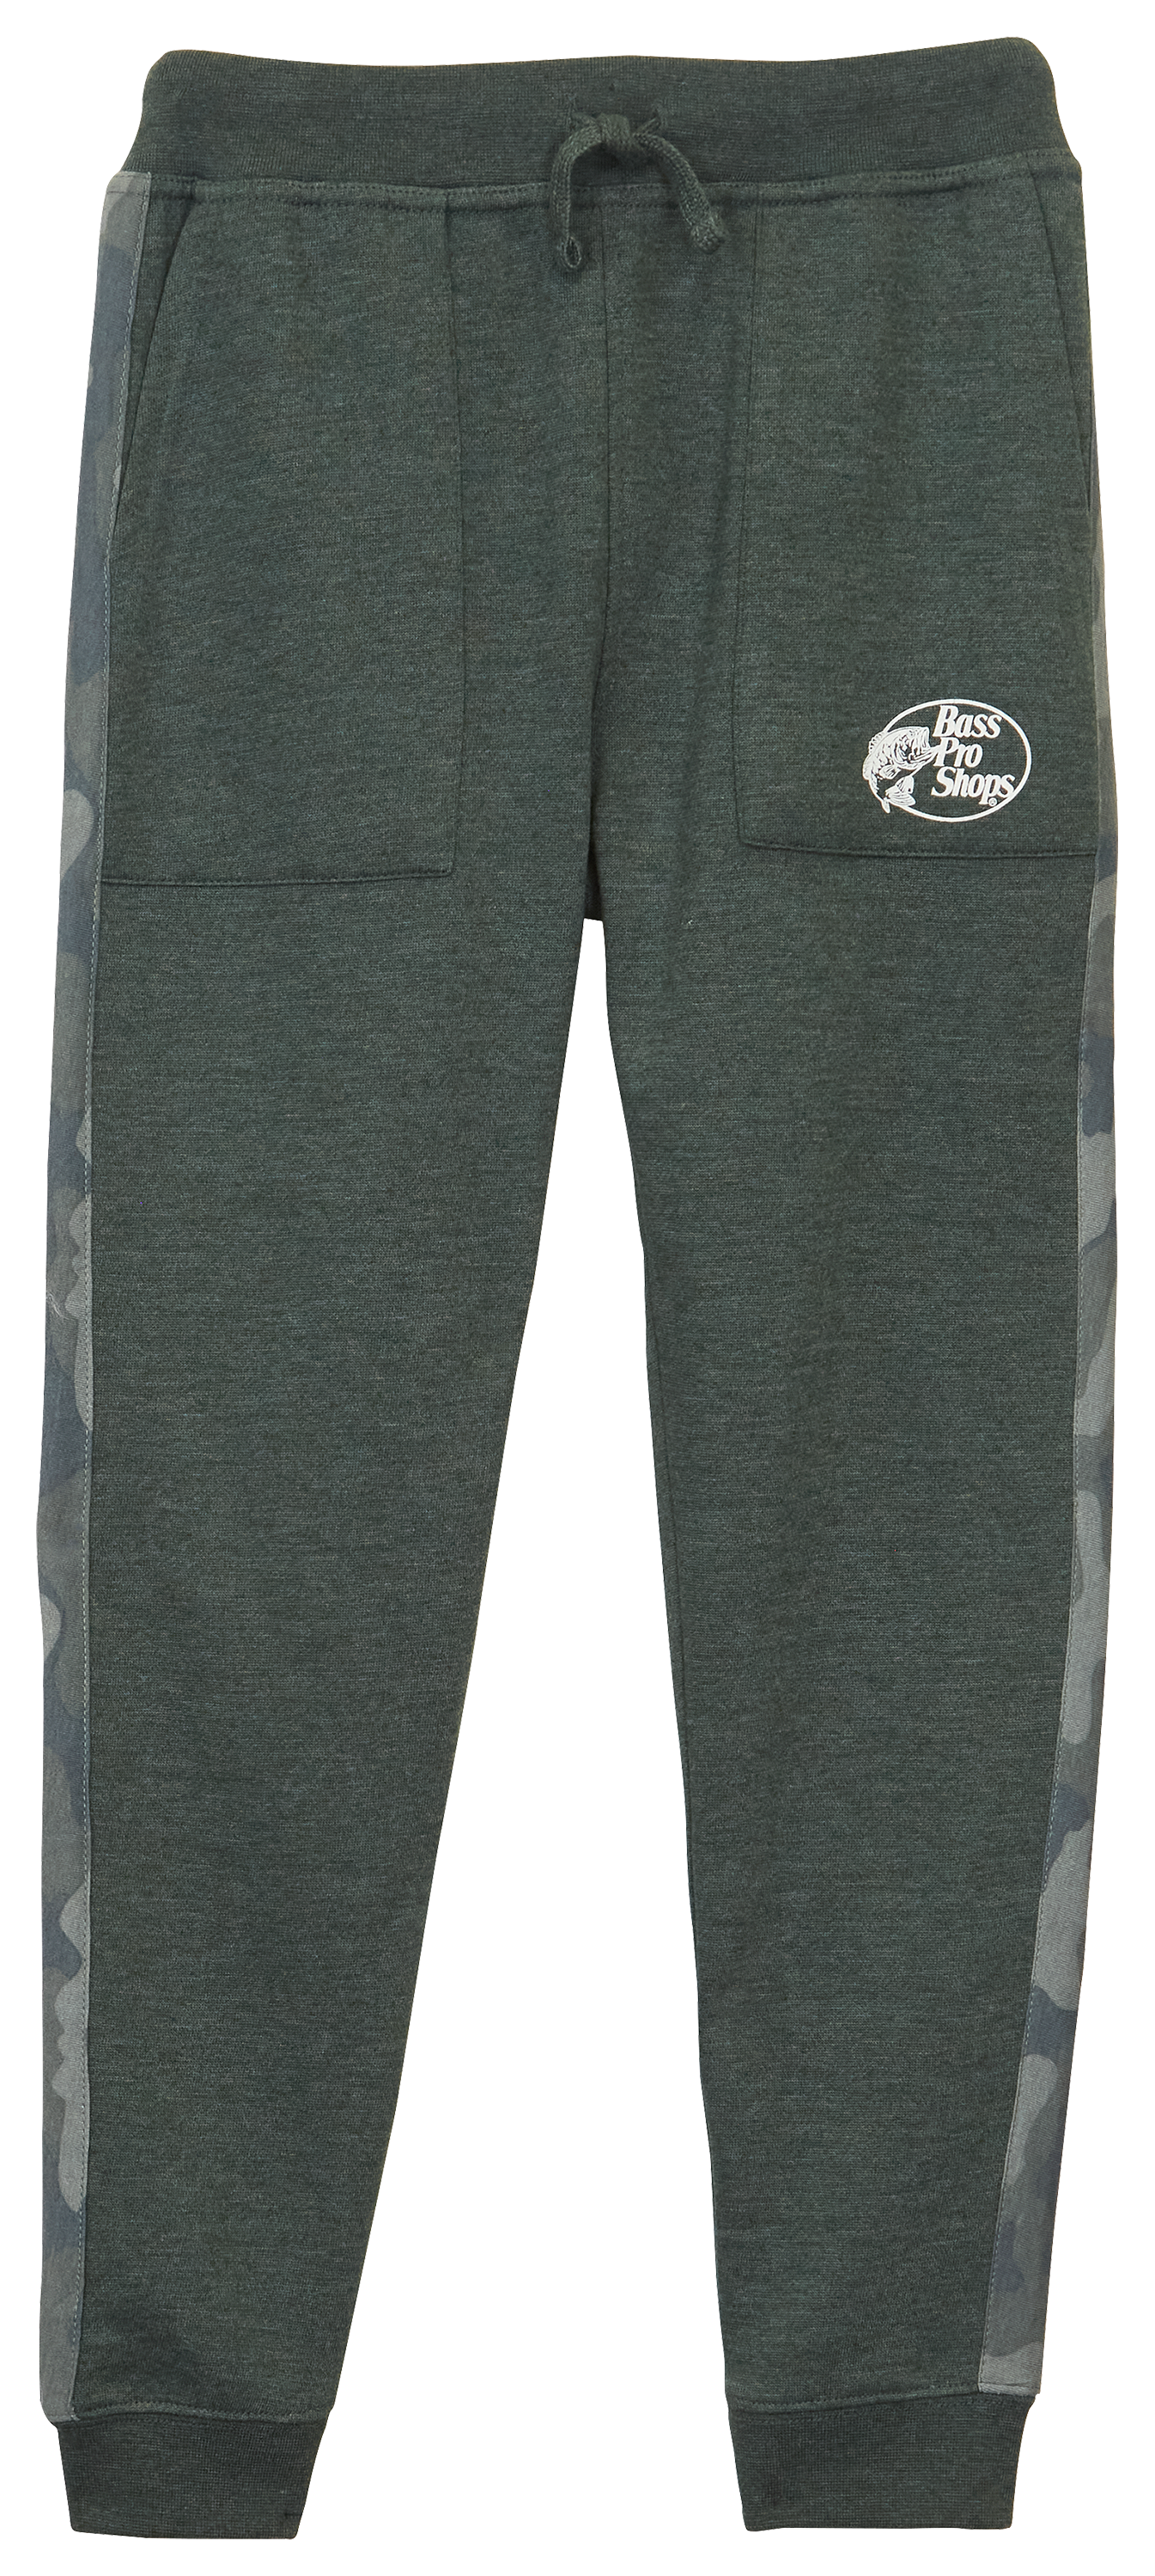 Bass Pro Shops Logo Jogger Pants for Toddlers or Kids